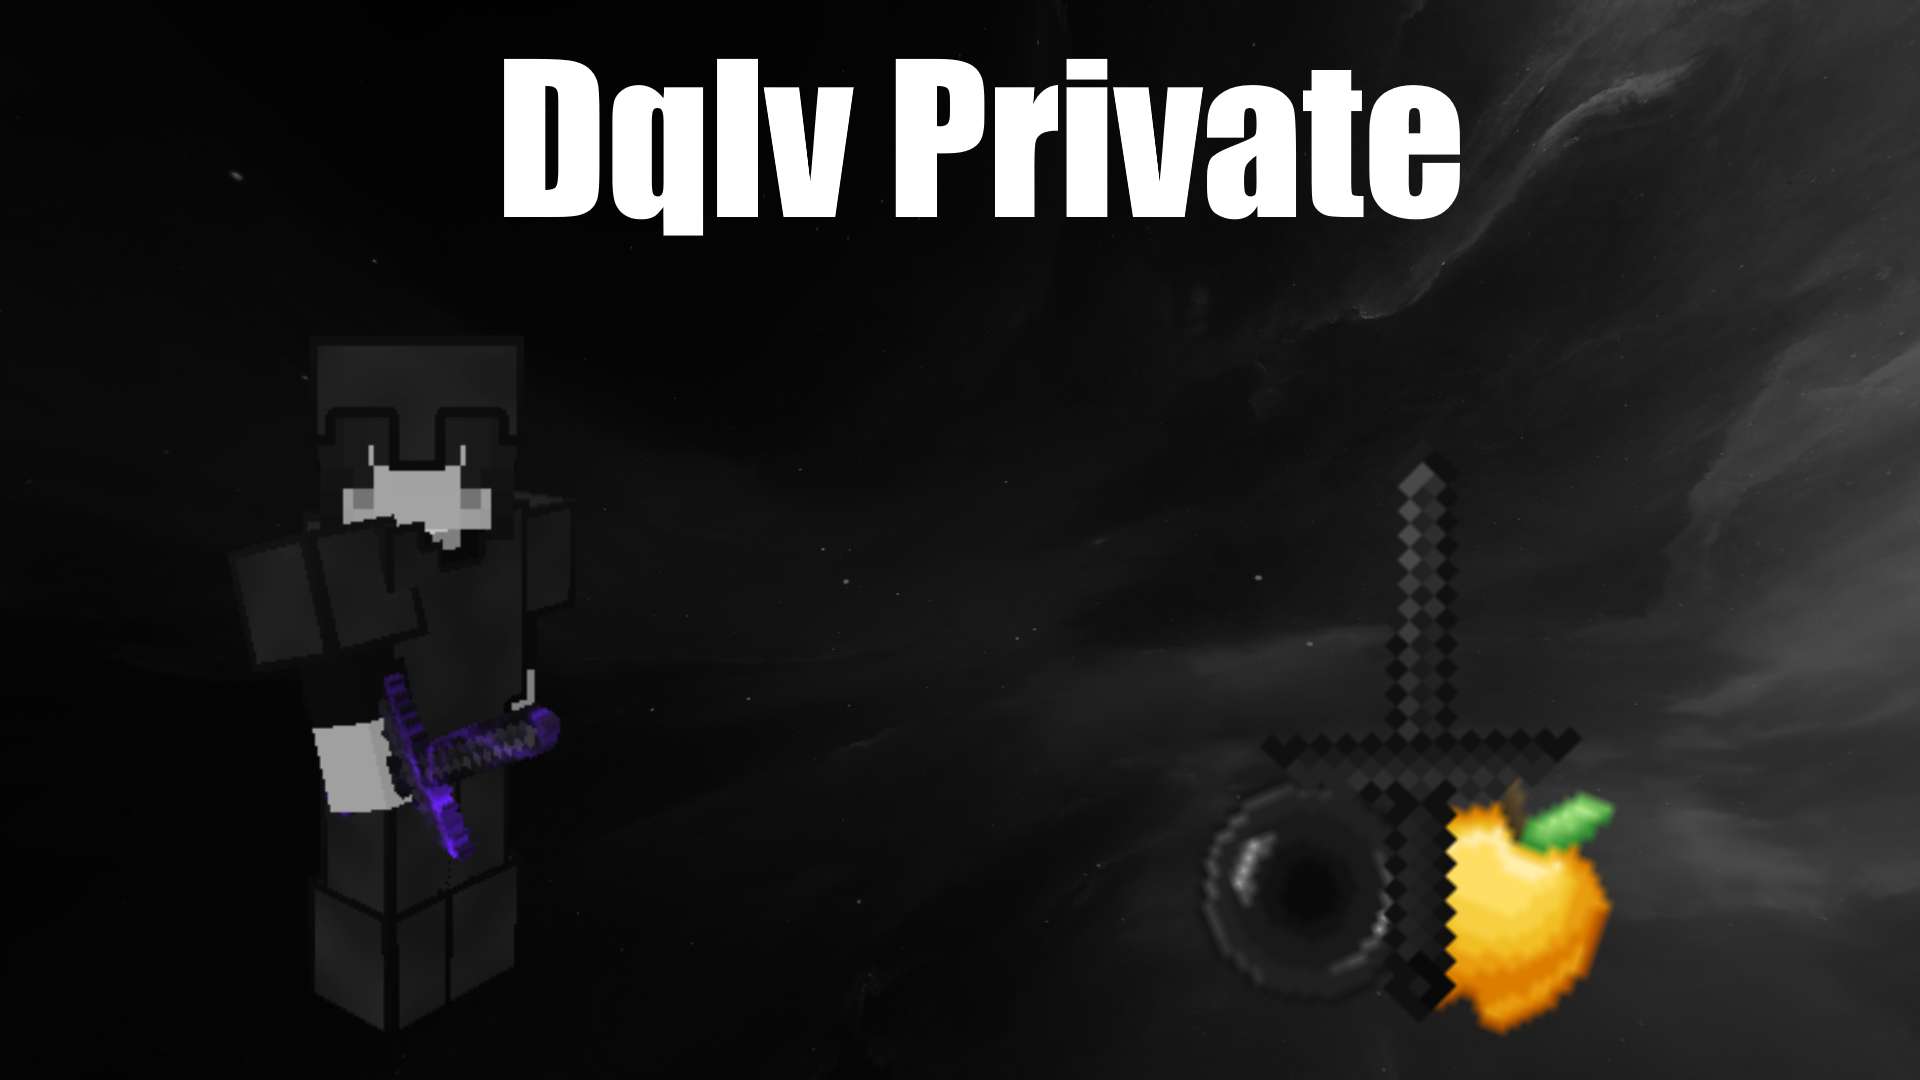 Dqlv Private Pack 32x by 𝑫𝒒𝒍𝒗 on PvPRP